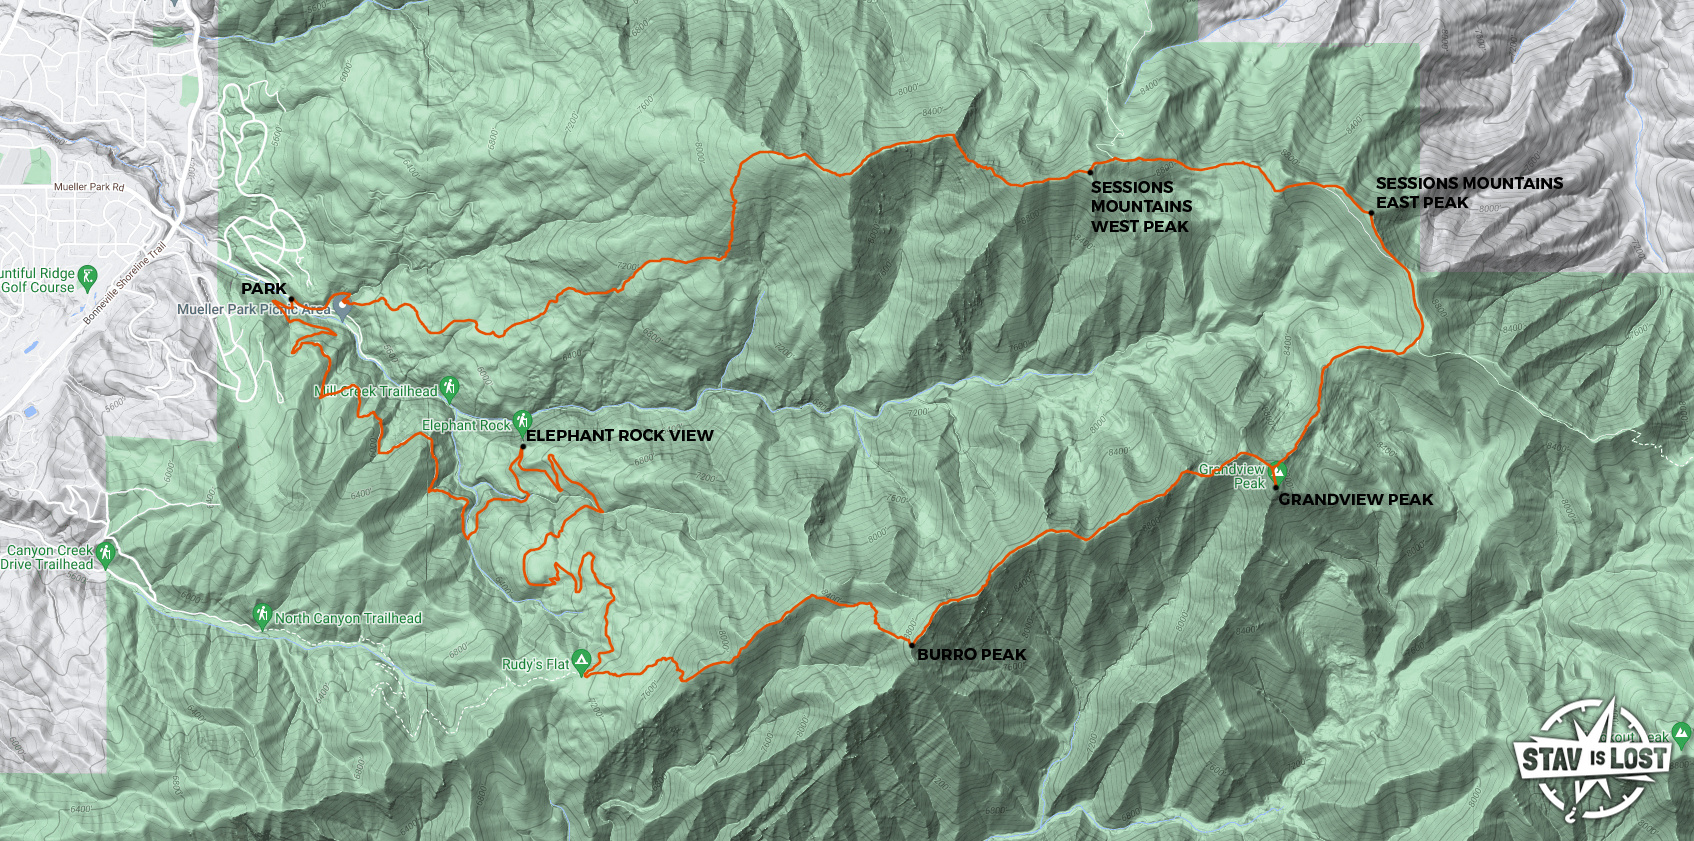 map for Sessions Mountains and Grandview Peak Loop by stav is lost